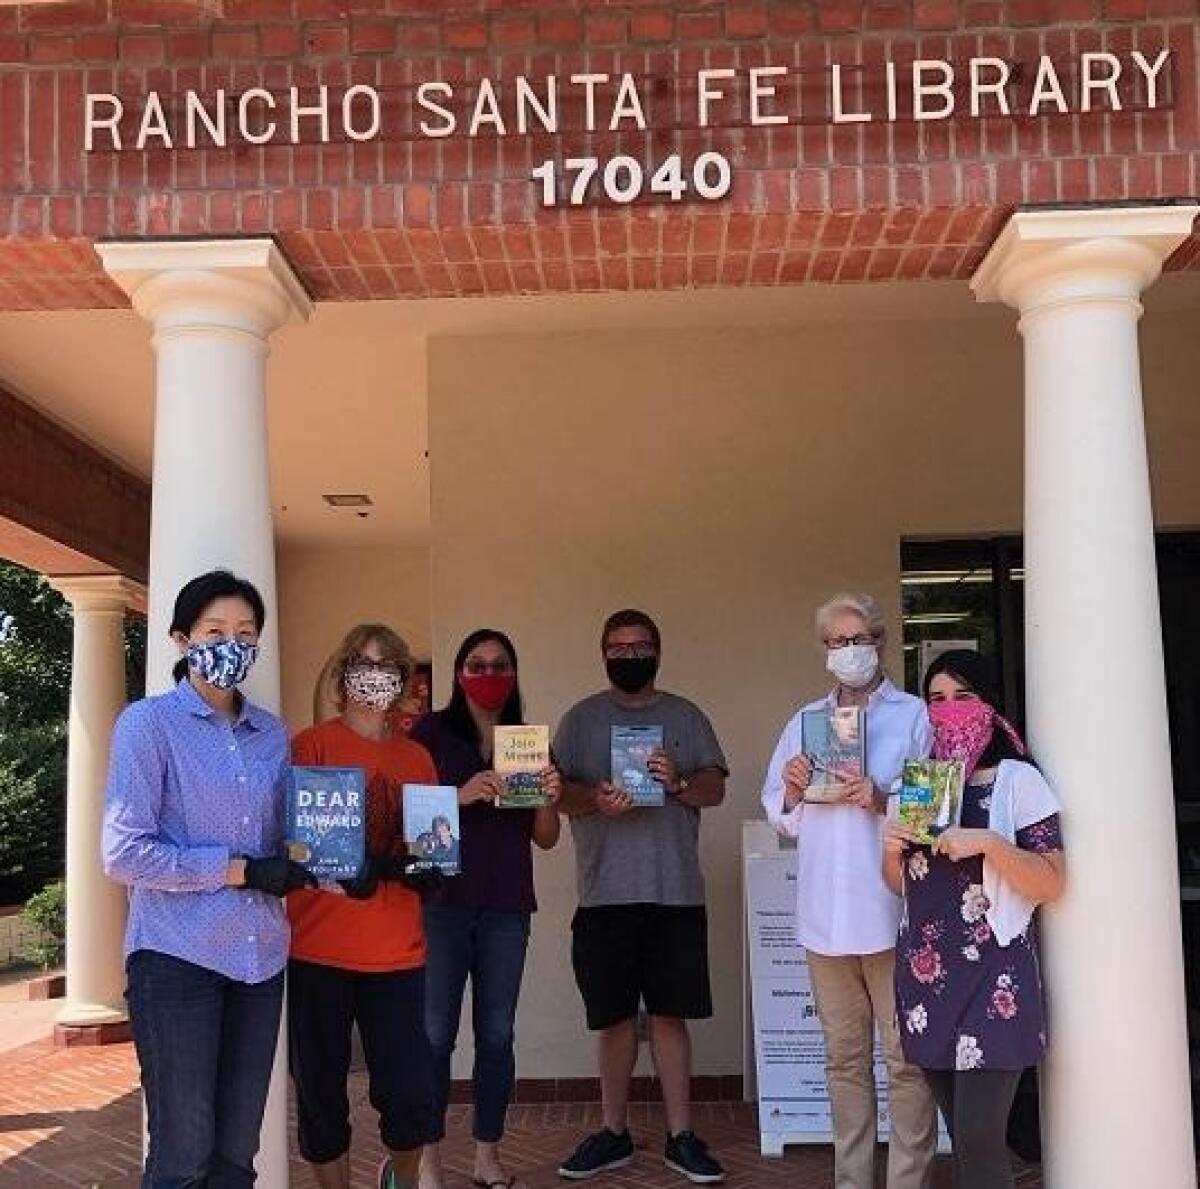 The Rancho Santa Fe Library staff is ready to welcome back readers.